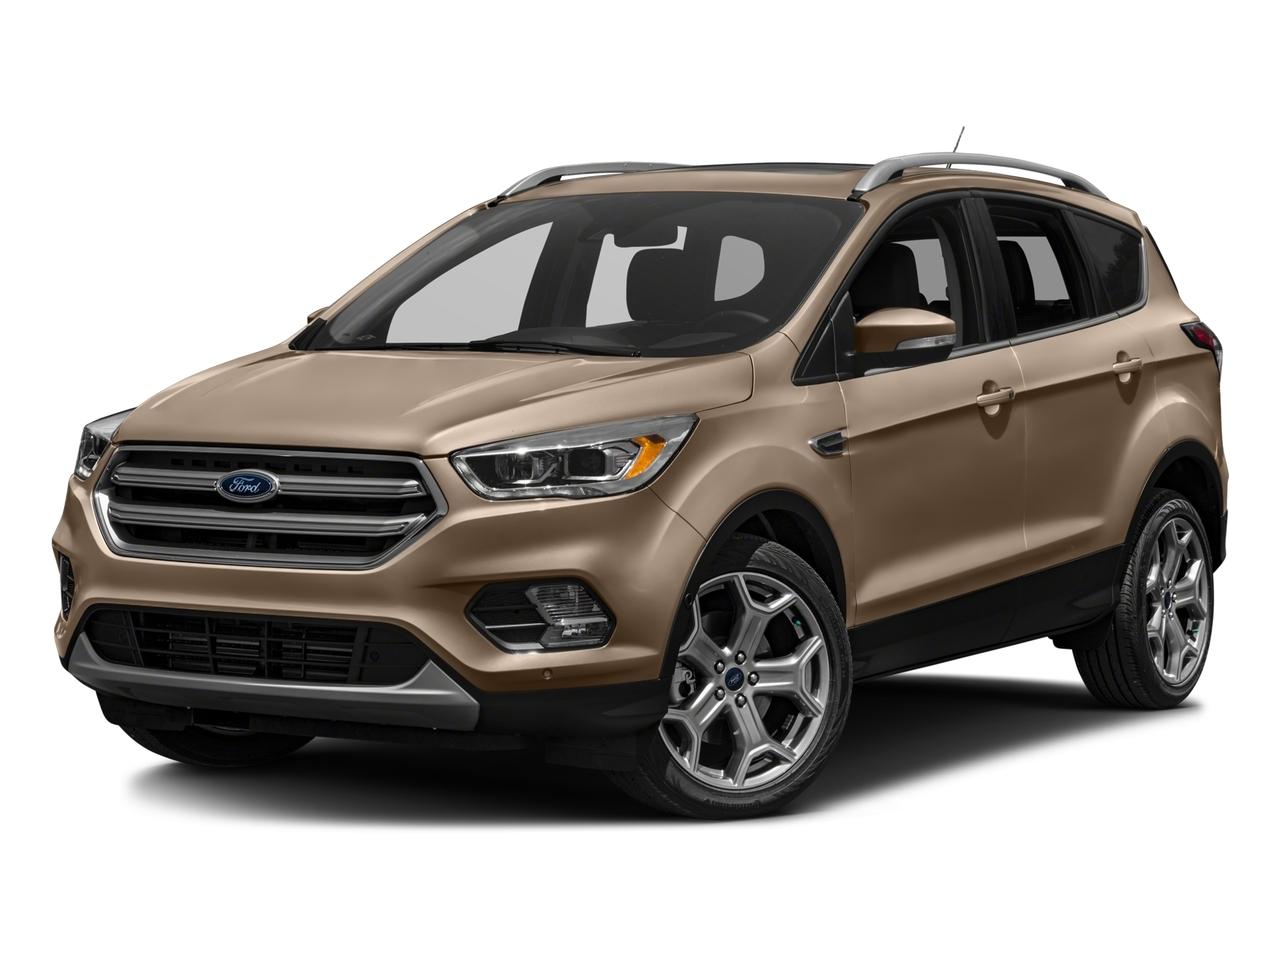 2018 Ford Escape Vehicle Photo in Winslow, AZ 86047-2439